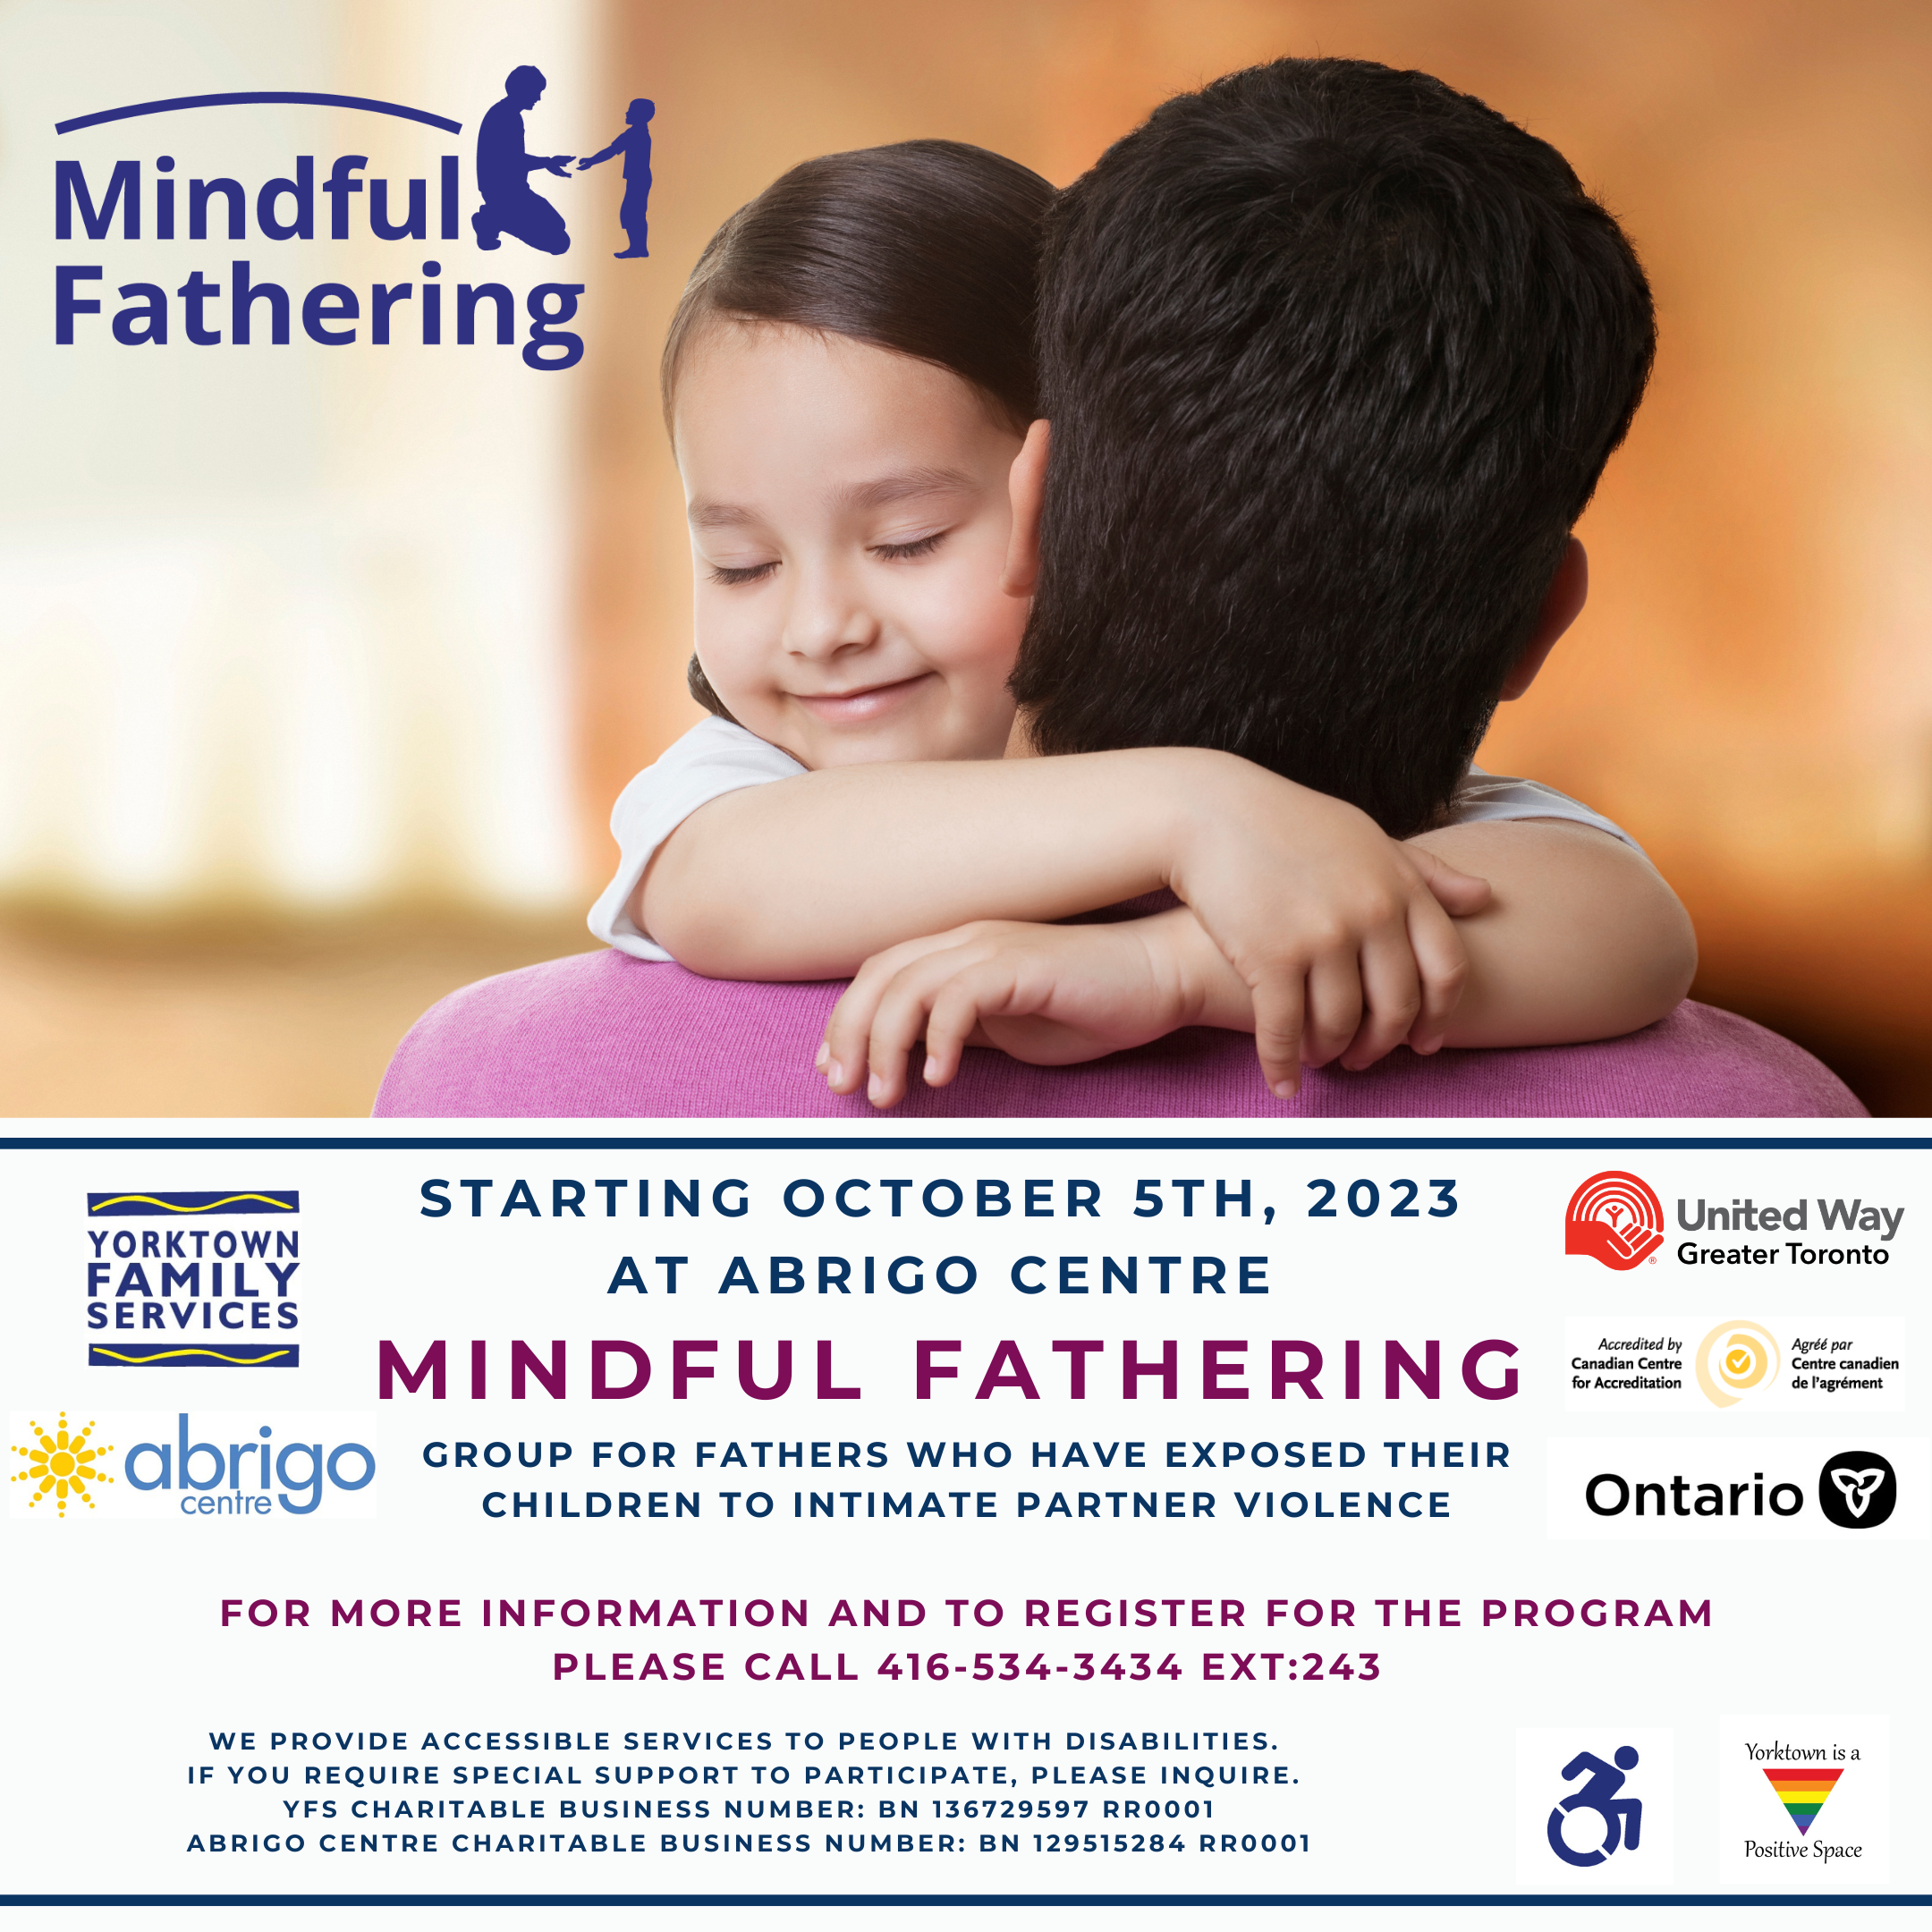 Yorktown Family Services and Abrigo Centre Mindful Fathering